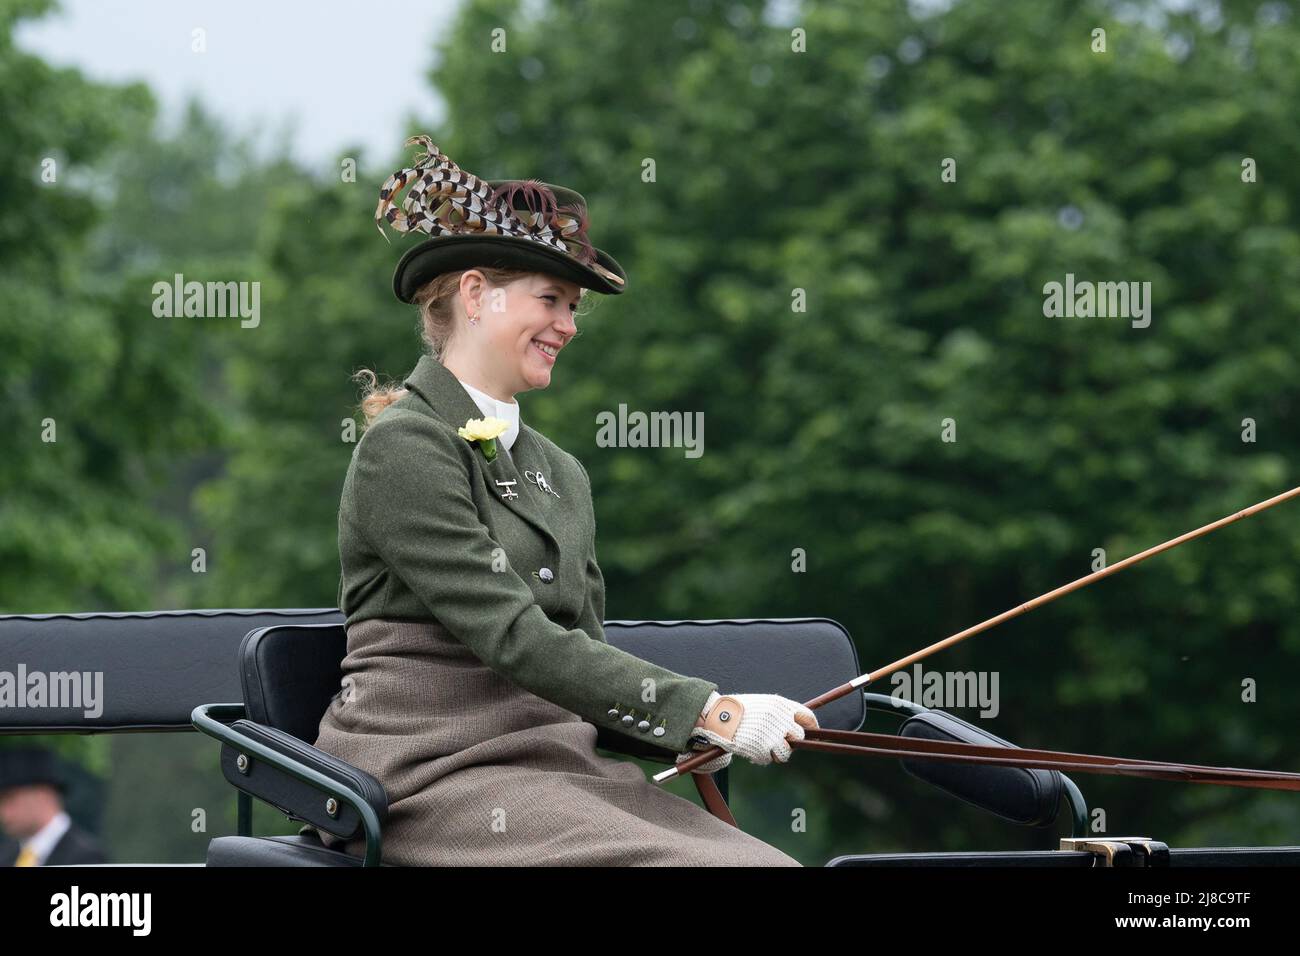 Windsor, Berkshire, UK. 15th May, 2022. Lady Louise Windsor was driving a carriage in the Champagne Laurent-Perrier Meet of the British Driving Society, Return from Drive today in the private grounds of Windsor Castle. The carriage belonged to her late Grandfather, the Duke of Edinburgh. Credit: Maureen McLean/Alamy Live News Stock Photo